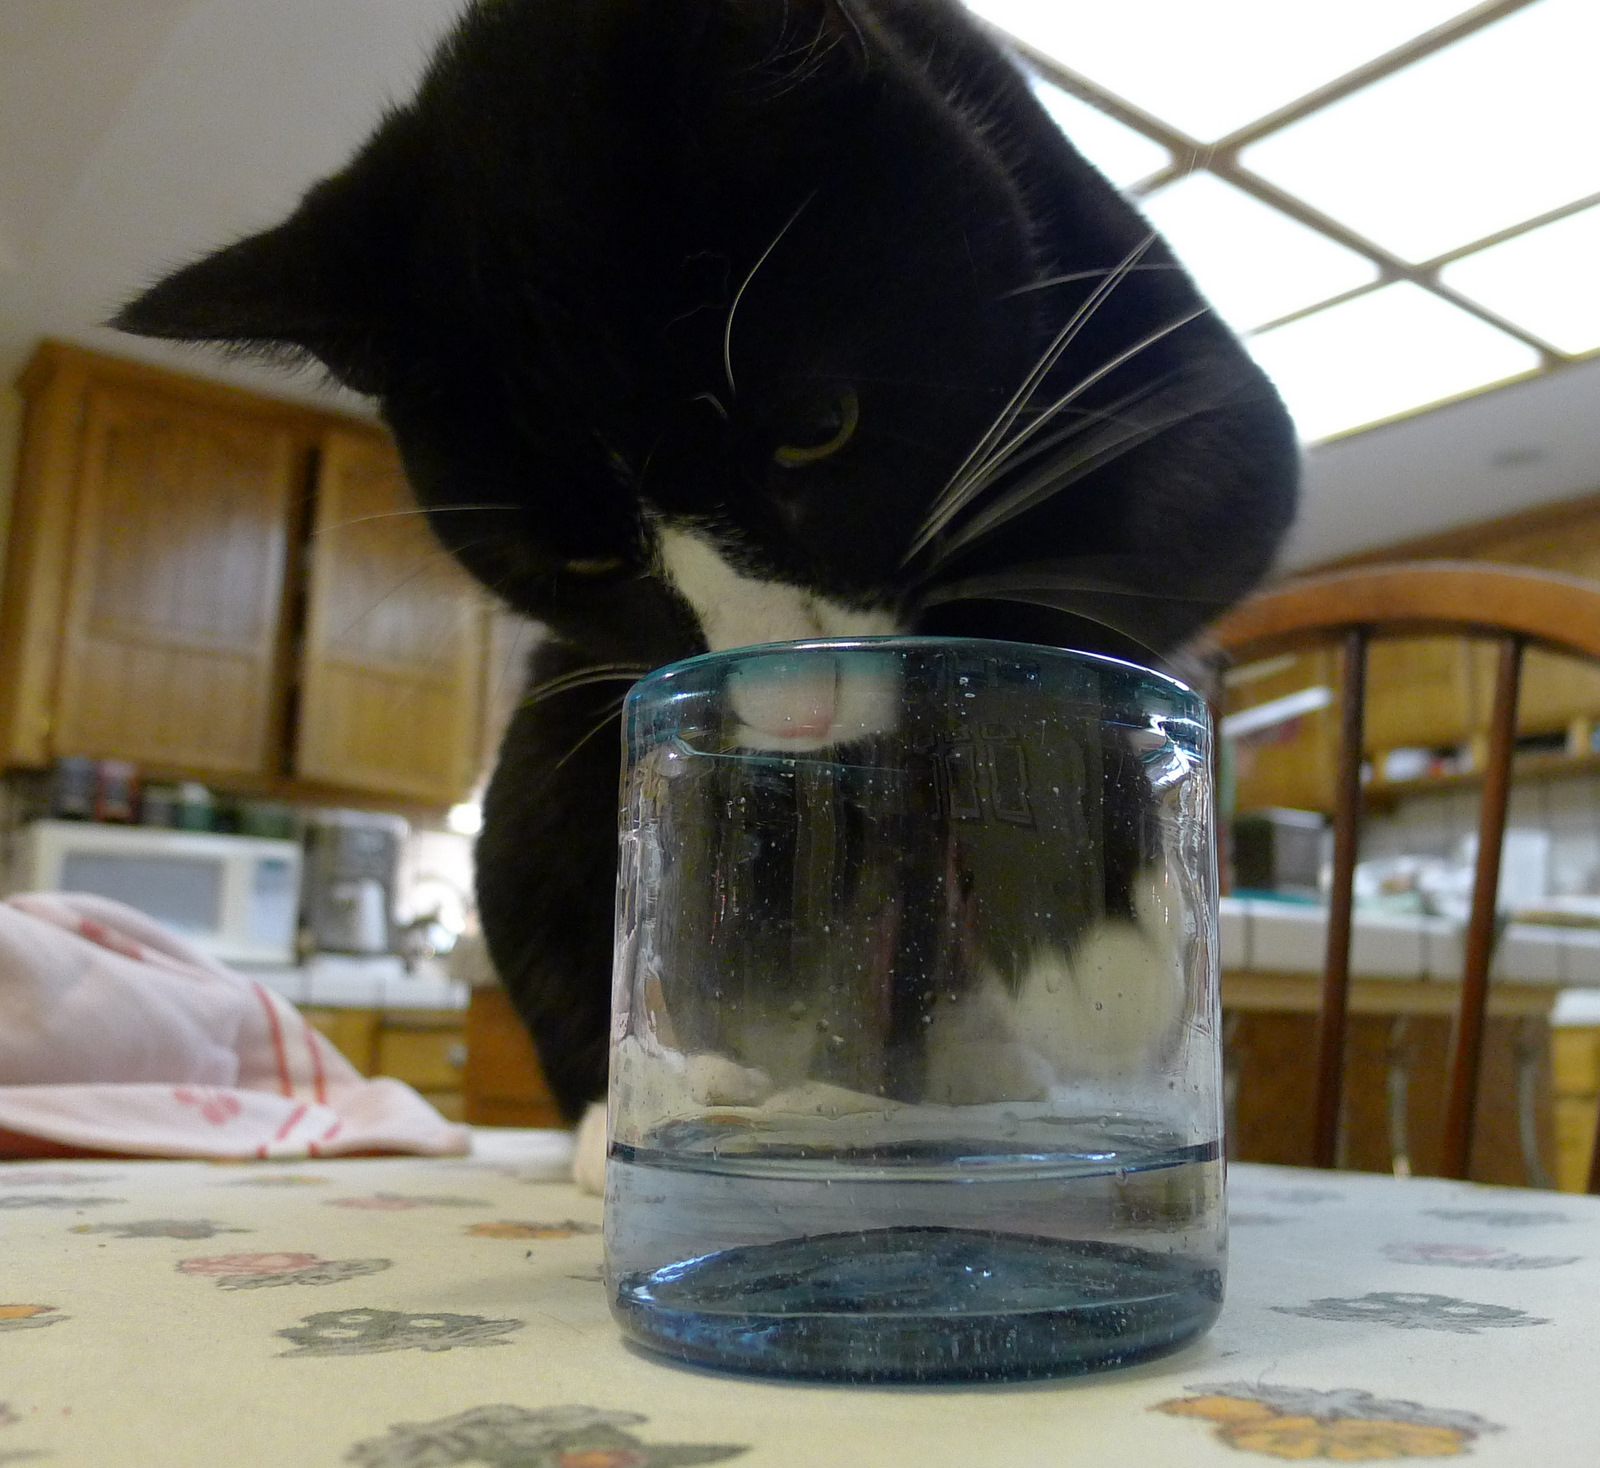 black cat sniffing a water glass on the table